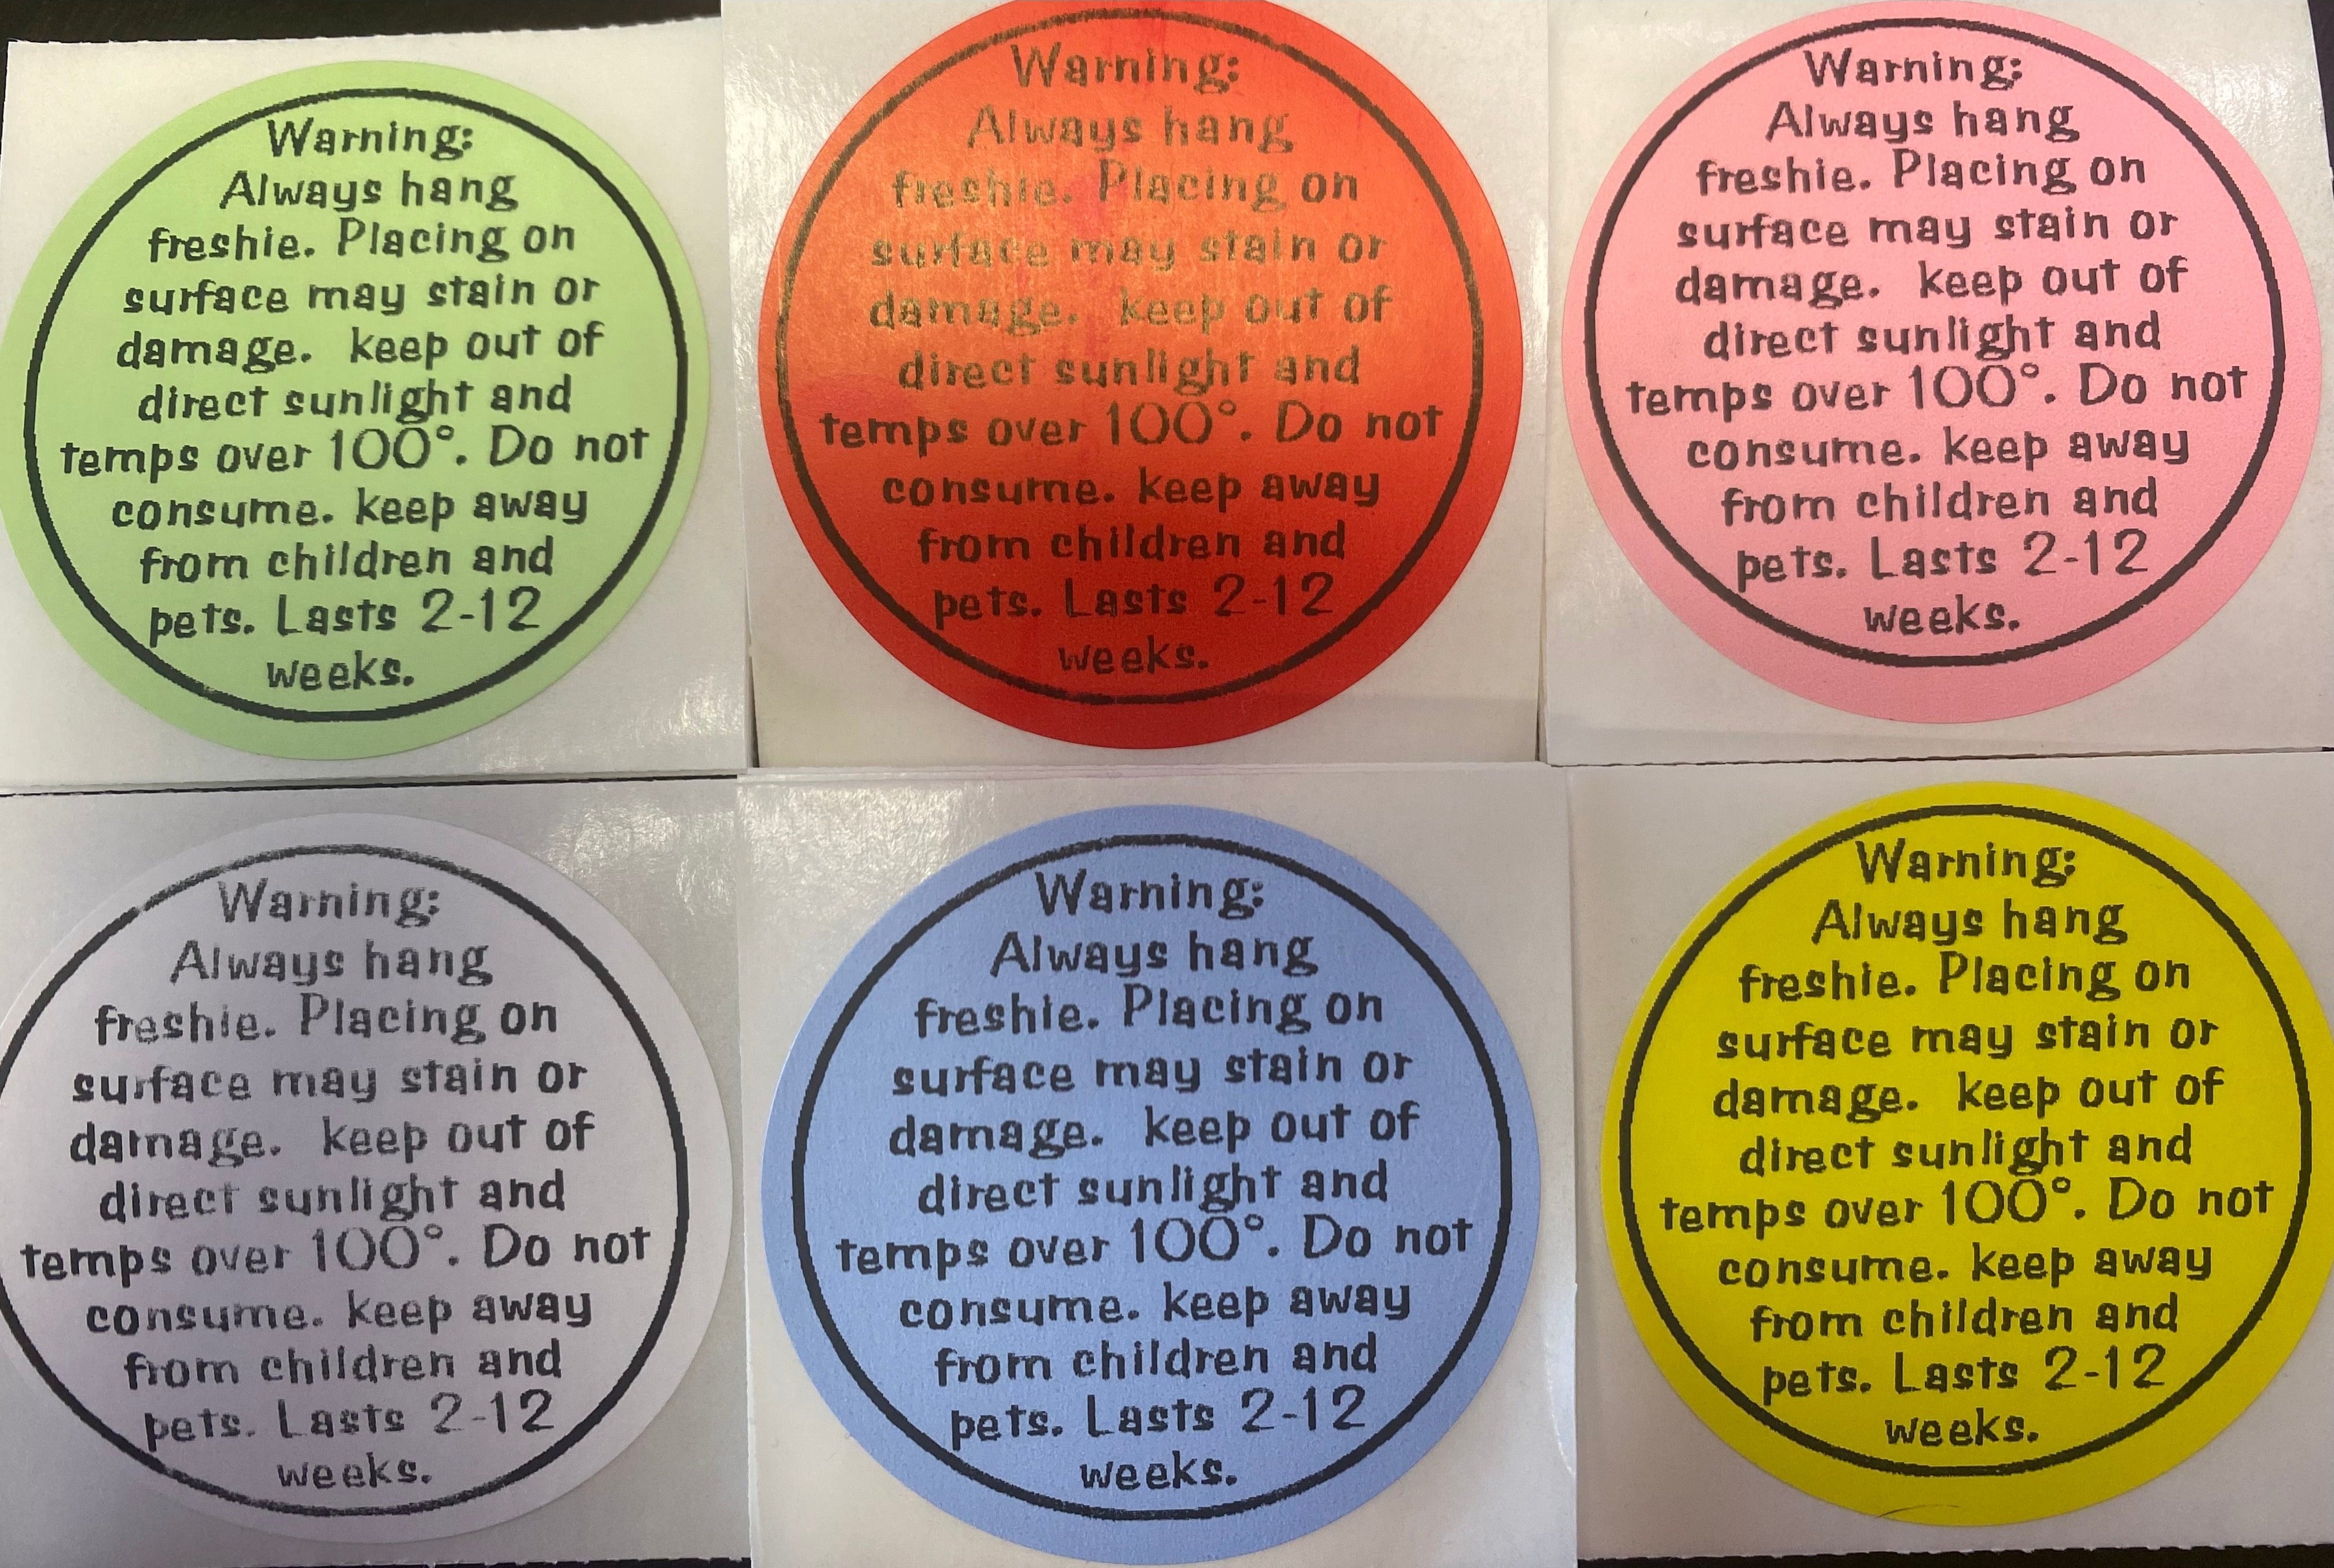 Freshie Care Instructions Stickers – Cured Aroma Beads